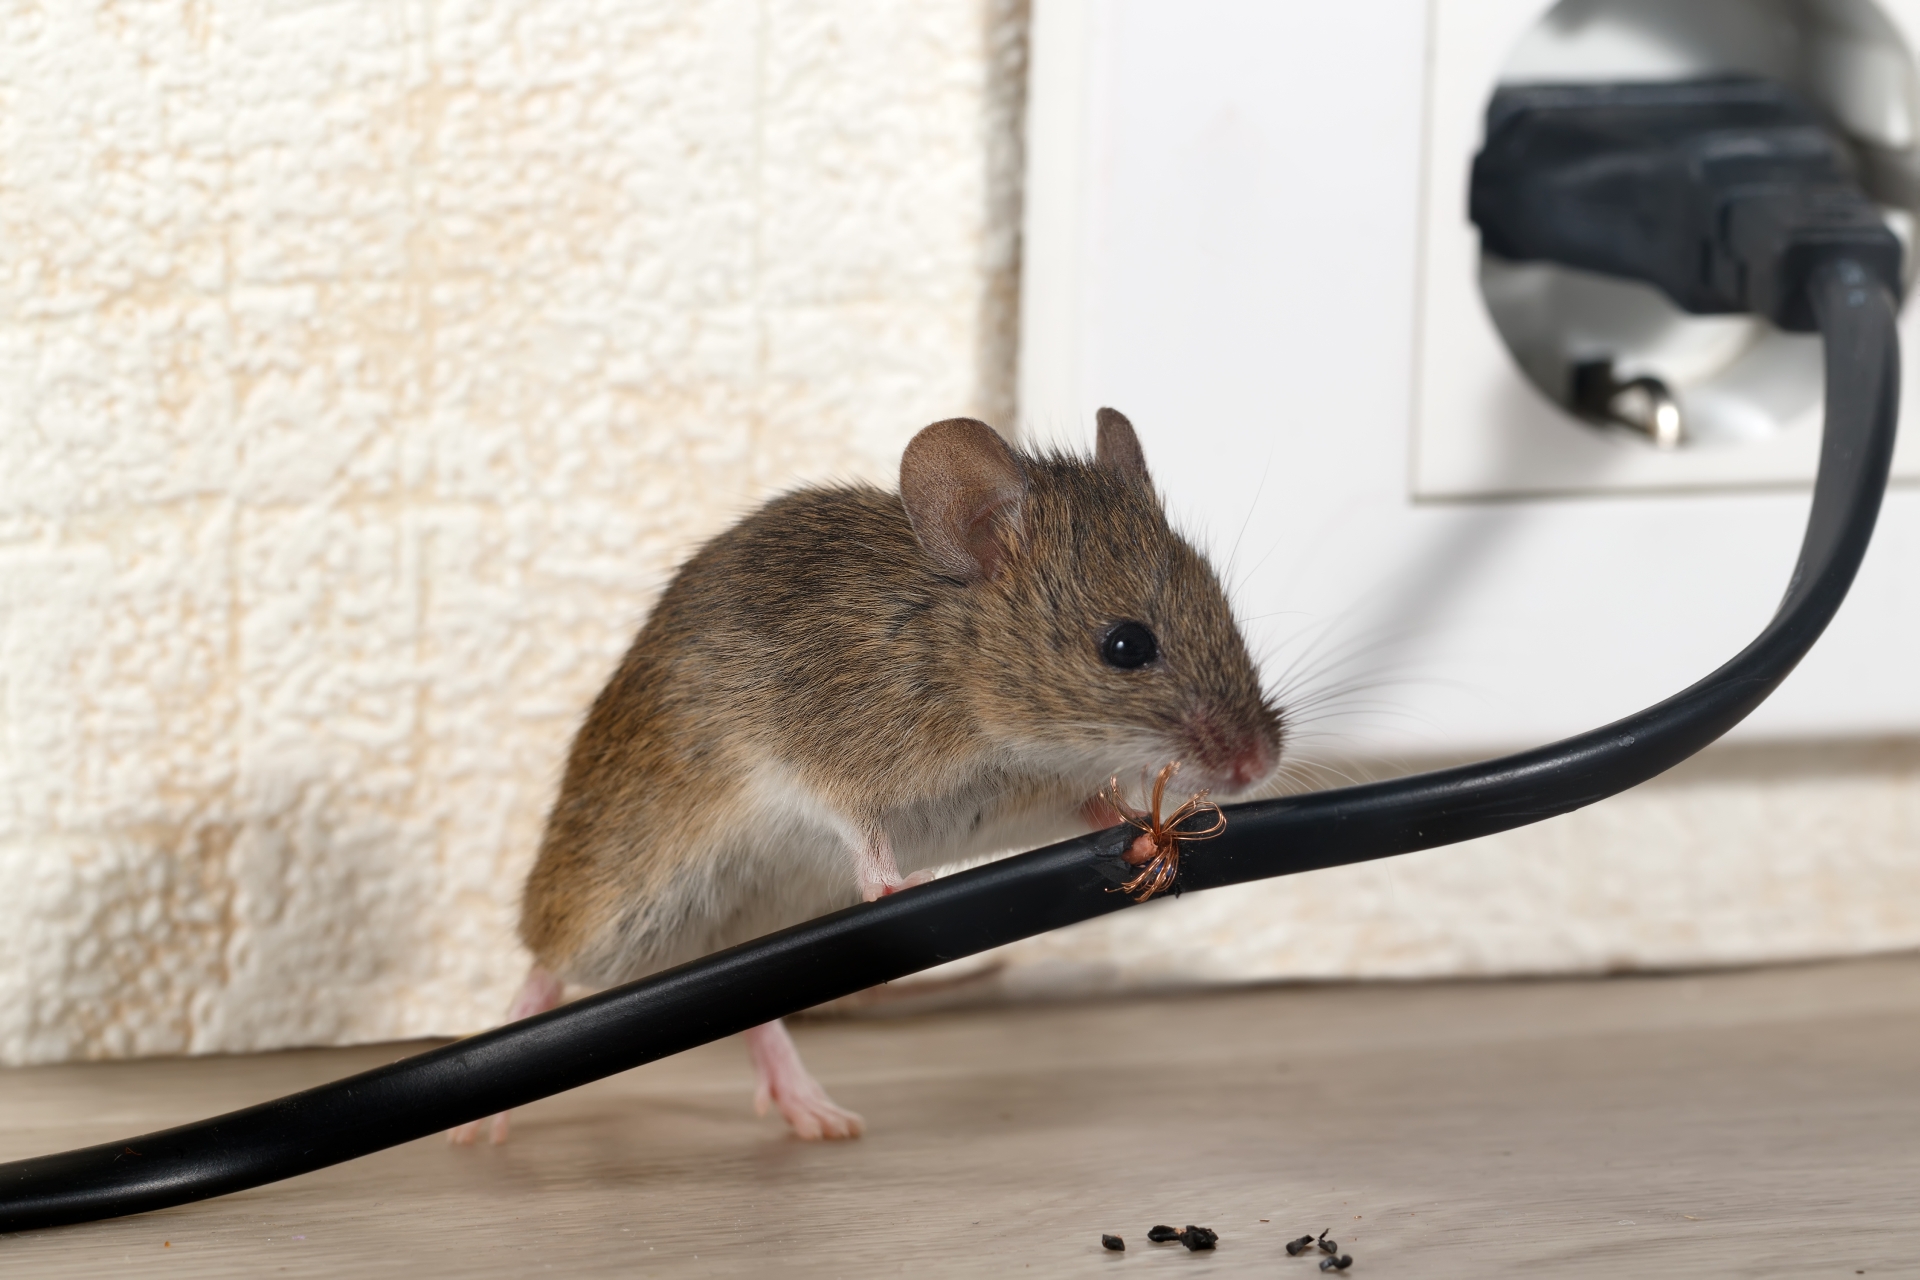 Mice Infestation, Pest Control in Dalston, E8. Call Now 020 8166 9746